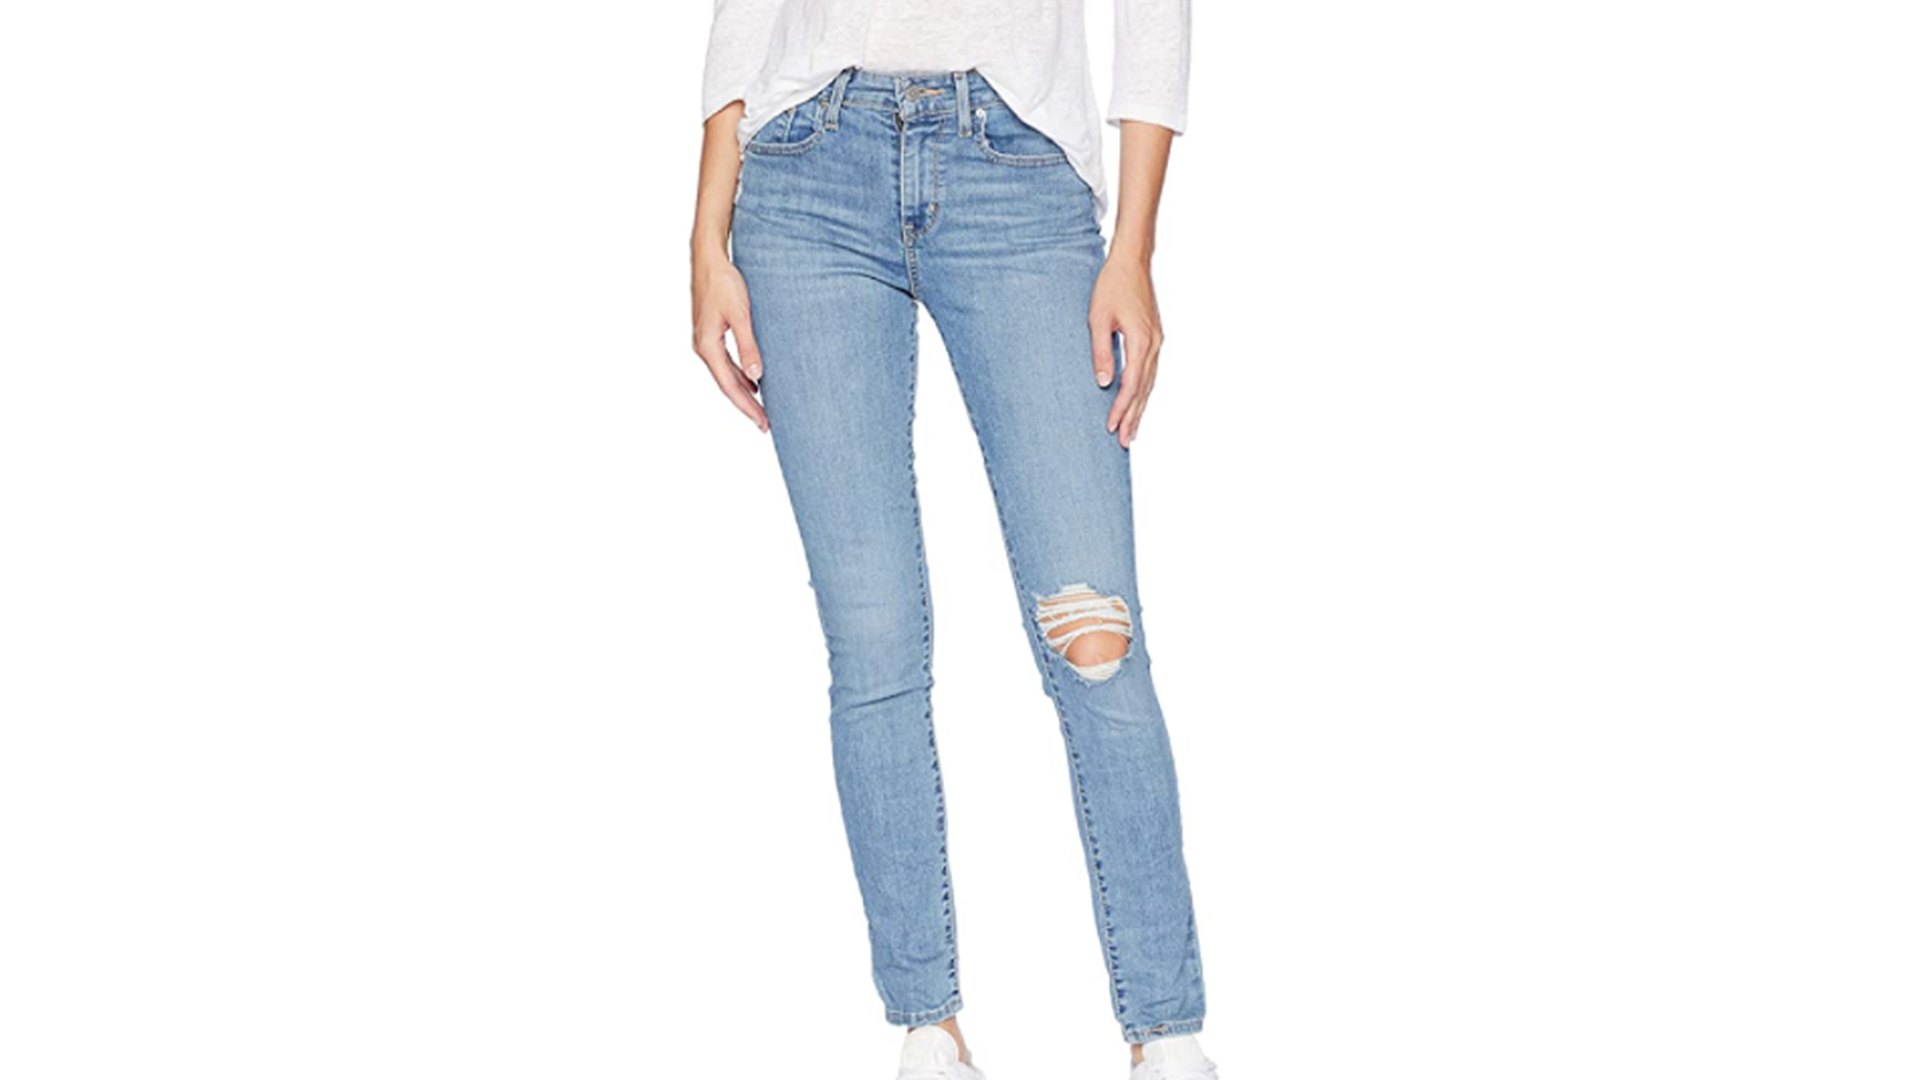 Levi’s Classic Skinny Jeans Are a Casual Fashion Staple | Us Weekly